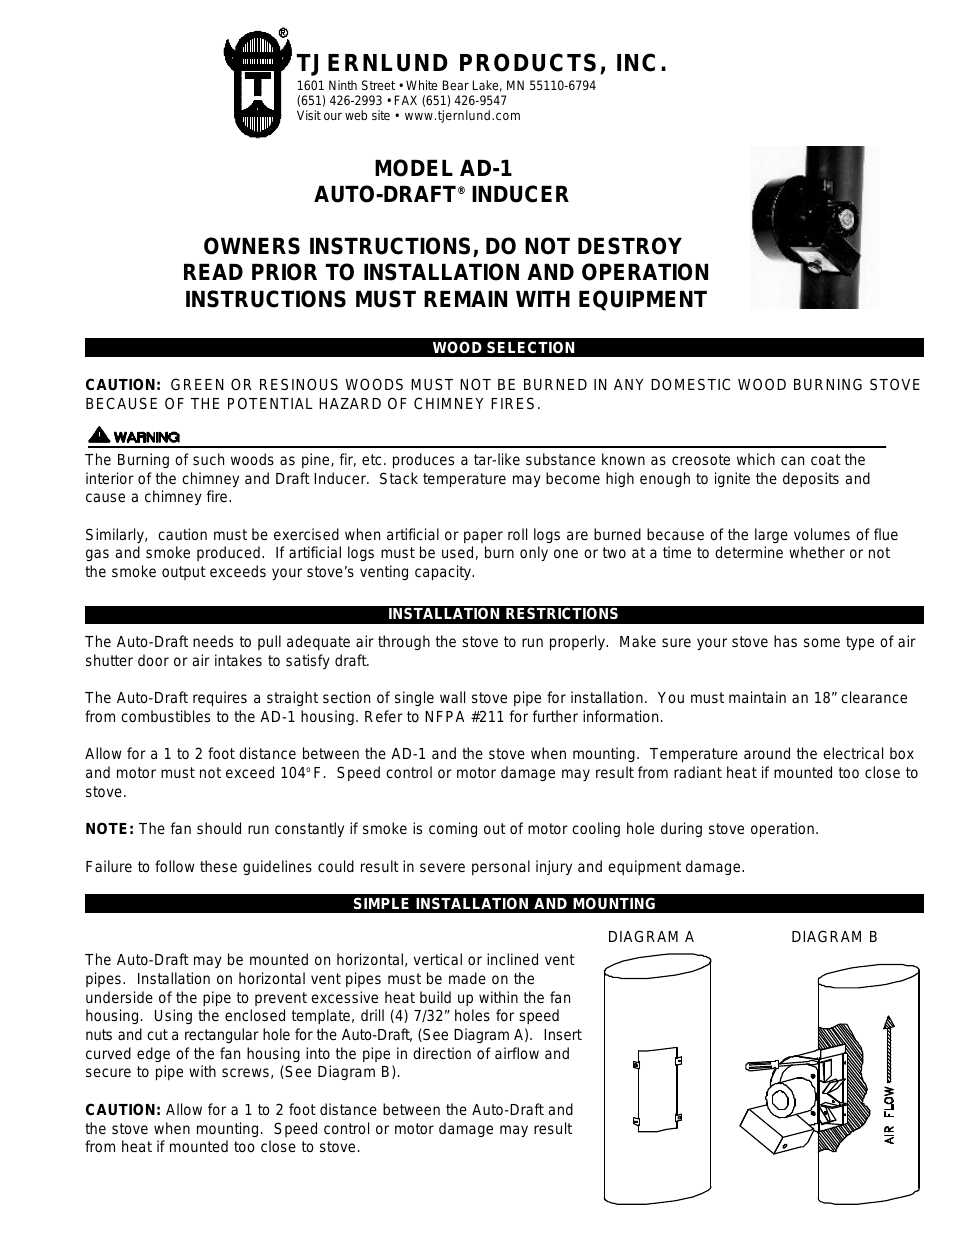 AD-1 for Wood or Coal Stoves 8504012 Rev A 10/99